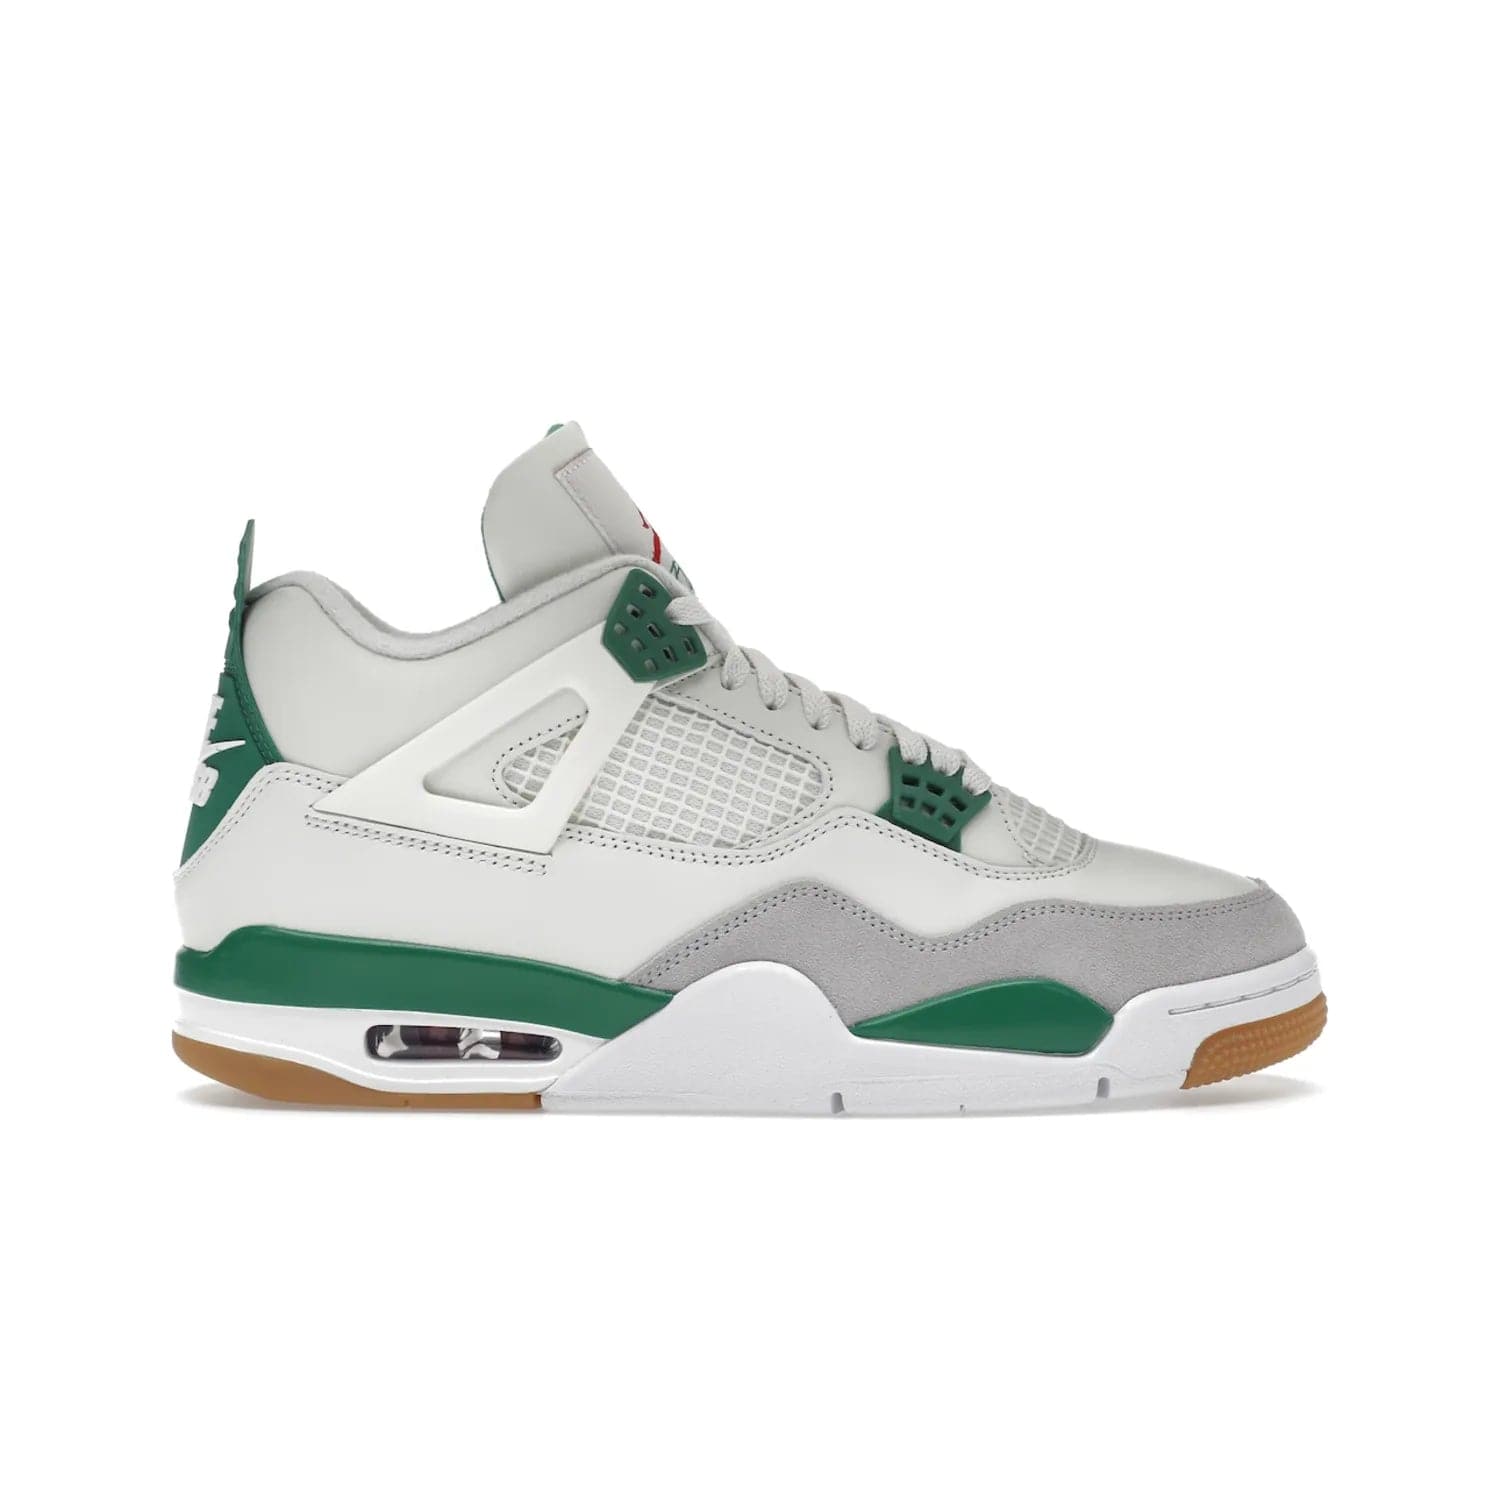 Jordan 4 Retro SB Pine Green - Image 1 - Only at www.BallersClubKickz.com - A white leather upper combined with a Neutral Grey suede mudguard gives this limited Air Jordan 4 Retro SB Pine Green sneaker its unmistakable style. Released March 20, 2023, the Jordan 4 Retro SB features a white and Pine Green midsole plus a red air unit with a gum outsole for grip. The perfect blend of Nike SB skateboarding and Jordan 4 classic design.